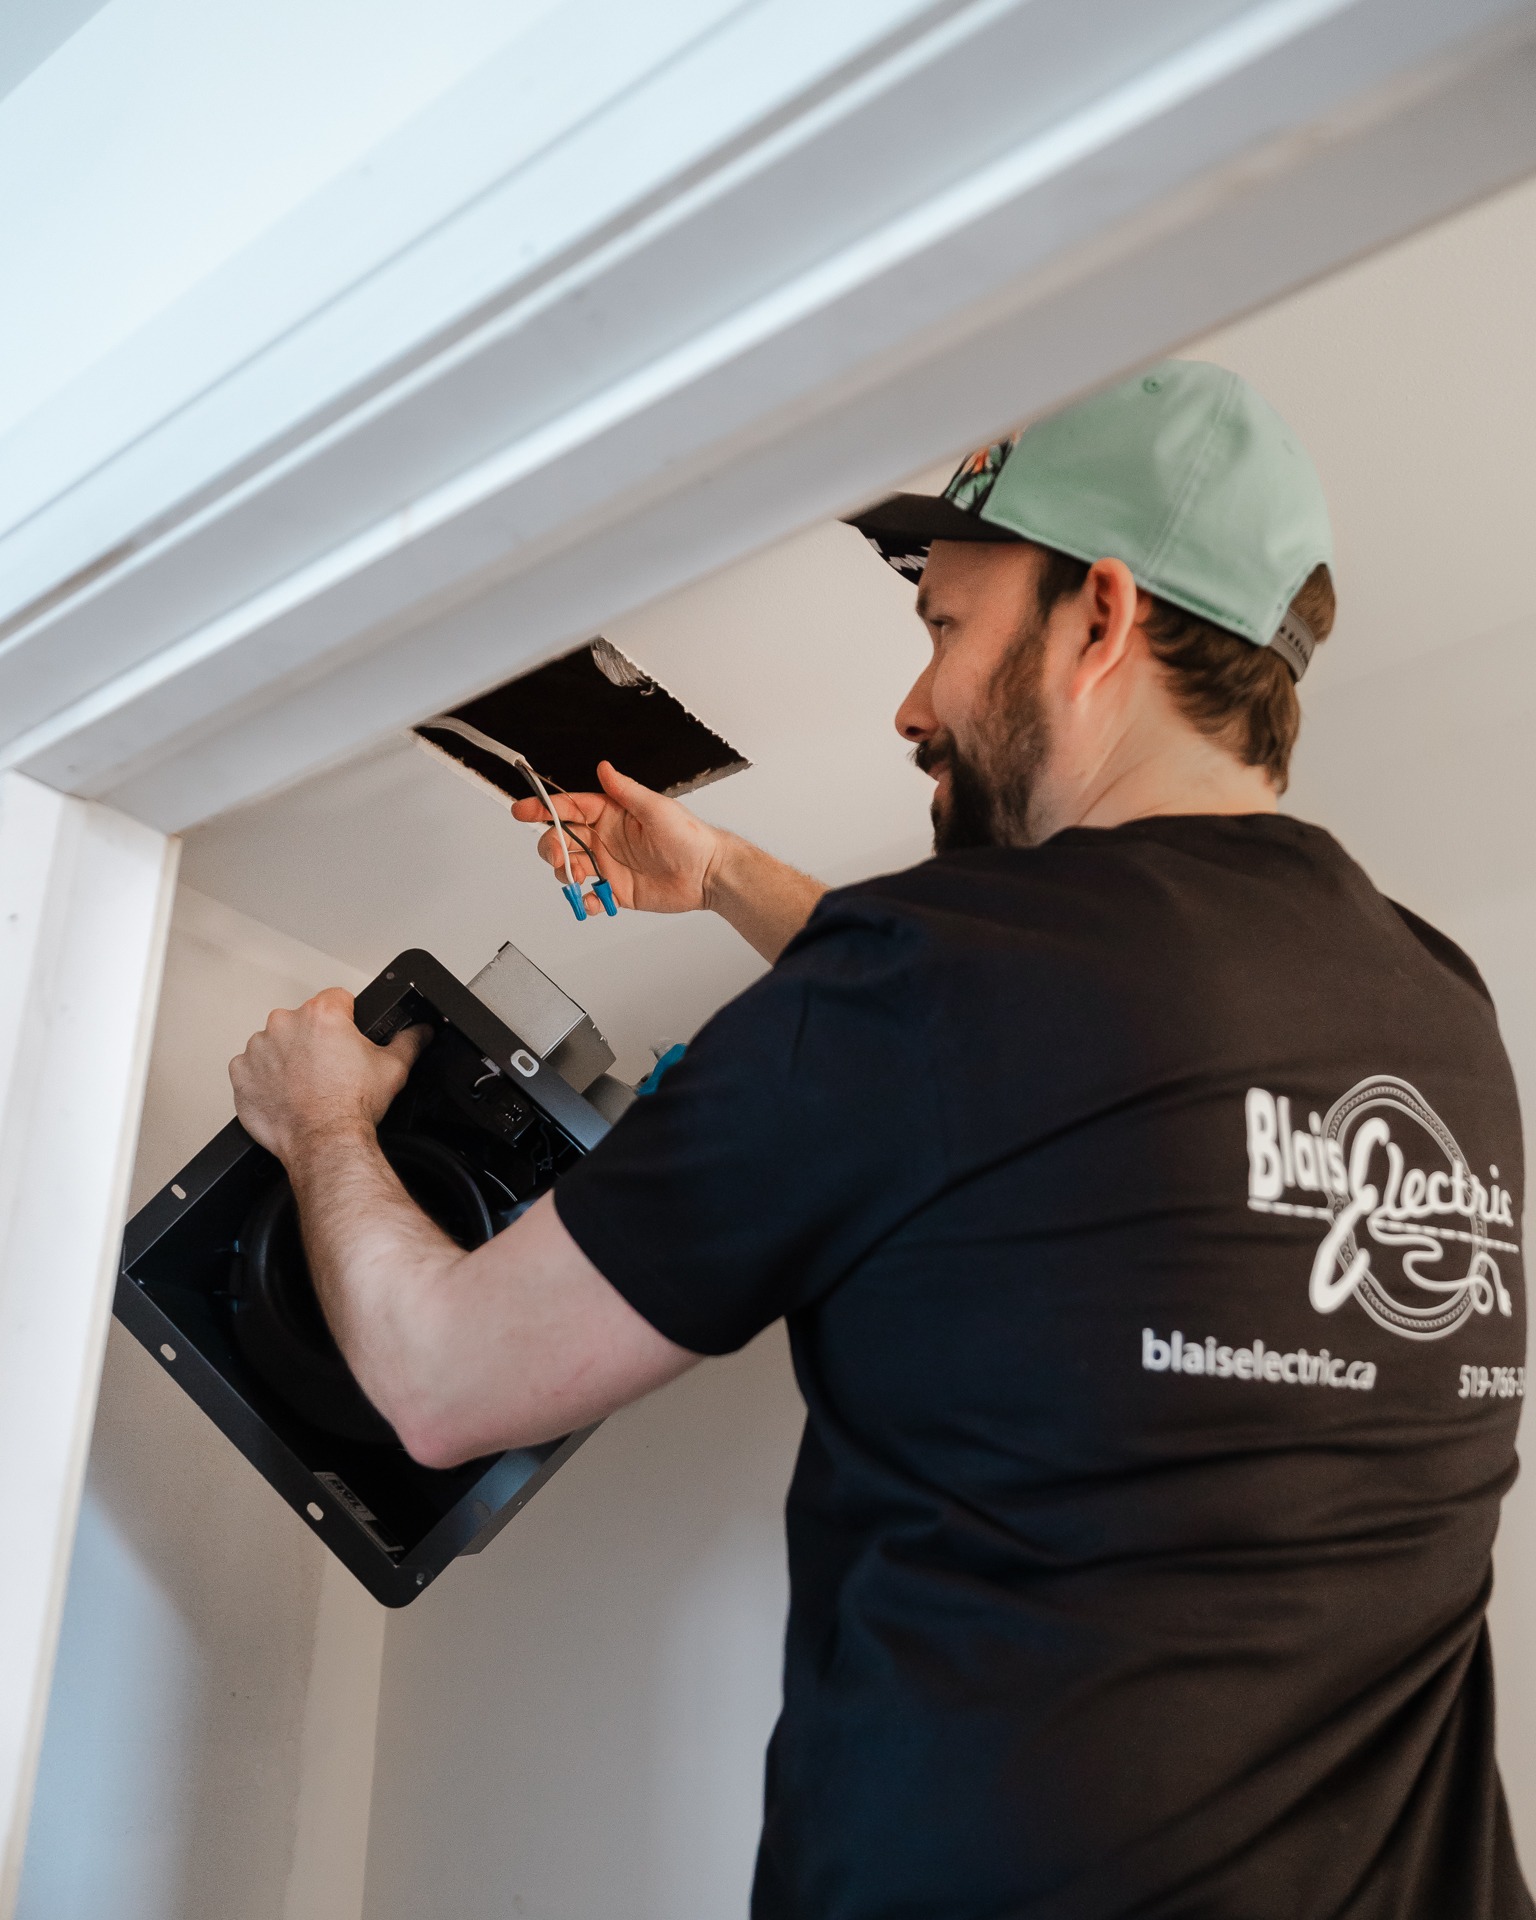 A person in a black shirt and baseball cap is installing a ceiling speaker, handling wires in a white interior setting.